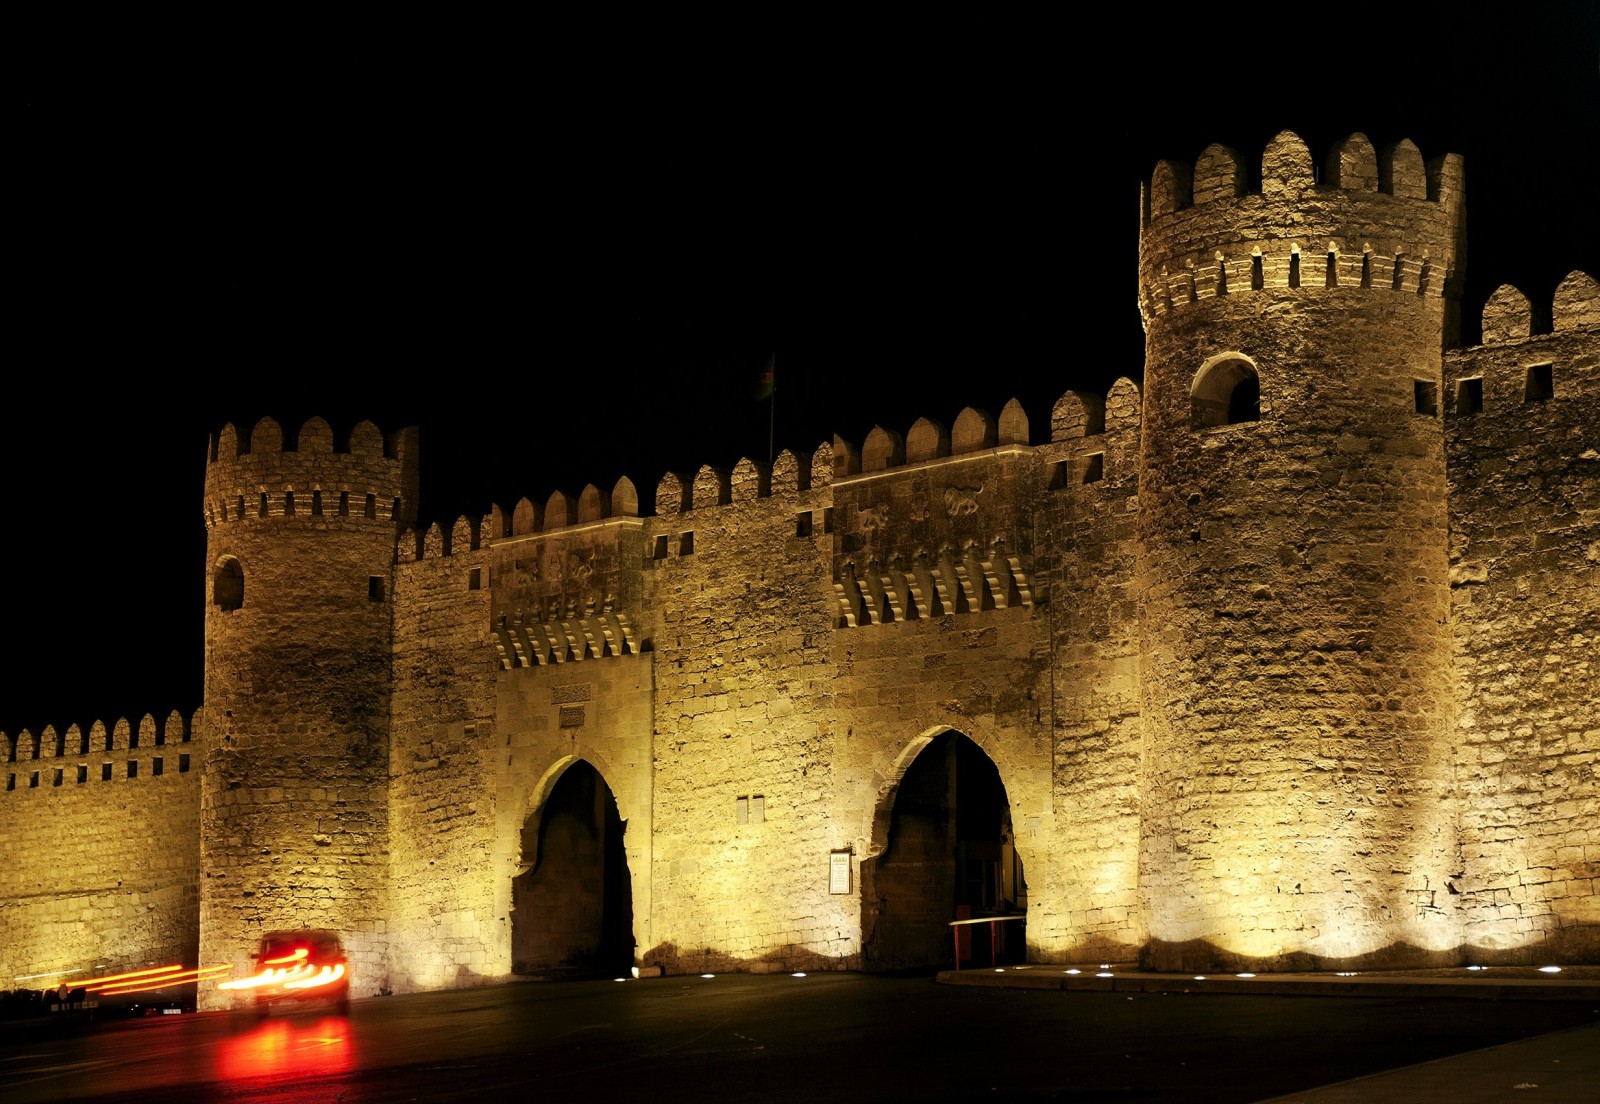 Monuments et Architectures - Page 2 Old-town-gate-in-baku-azerbaijan-by-night-1600x1104